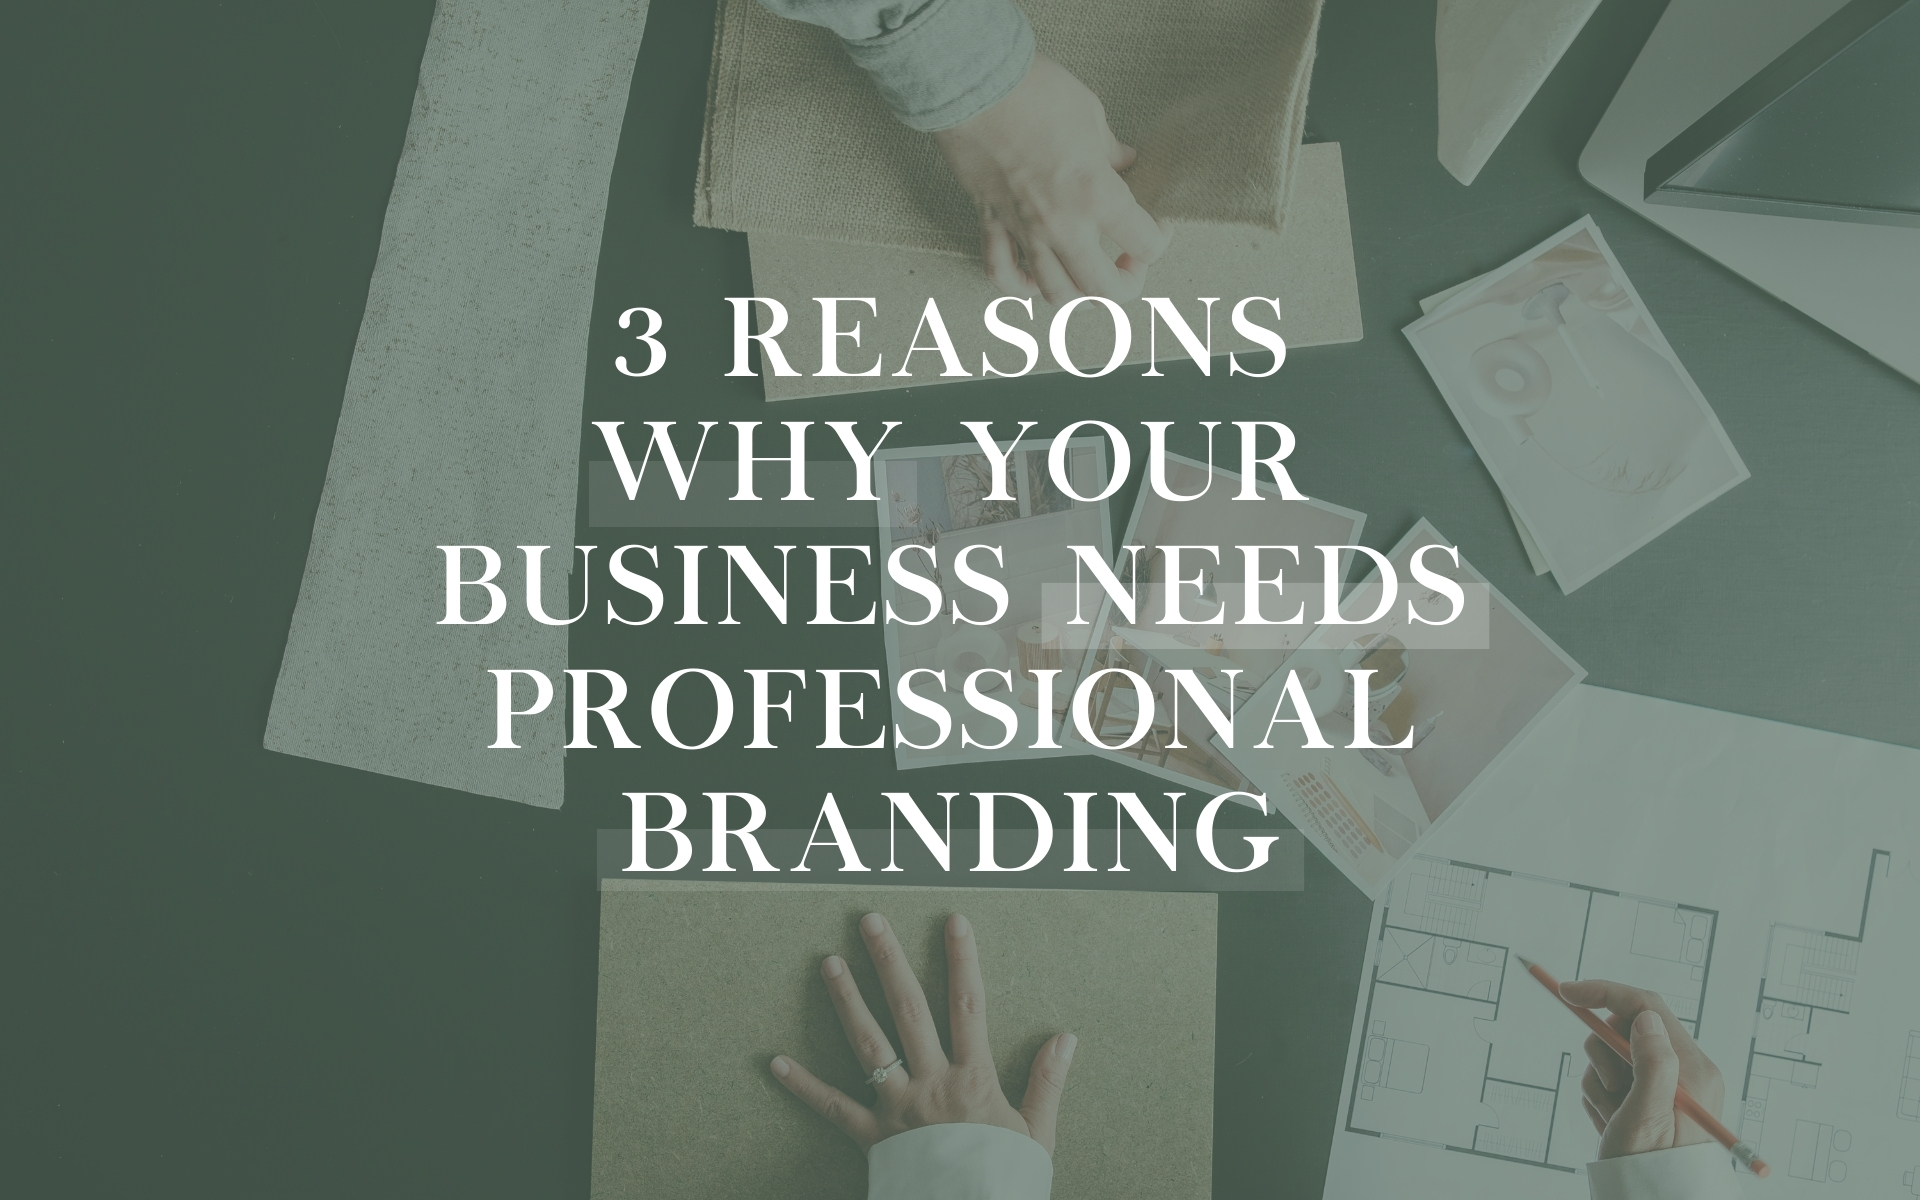 3 Reasons why your business needs professional branding